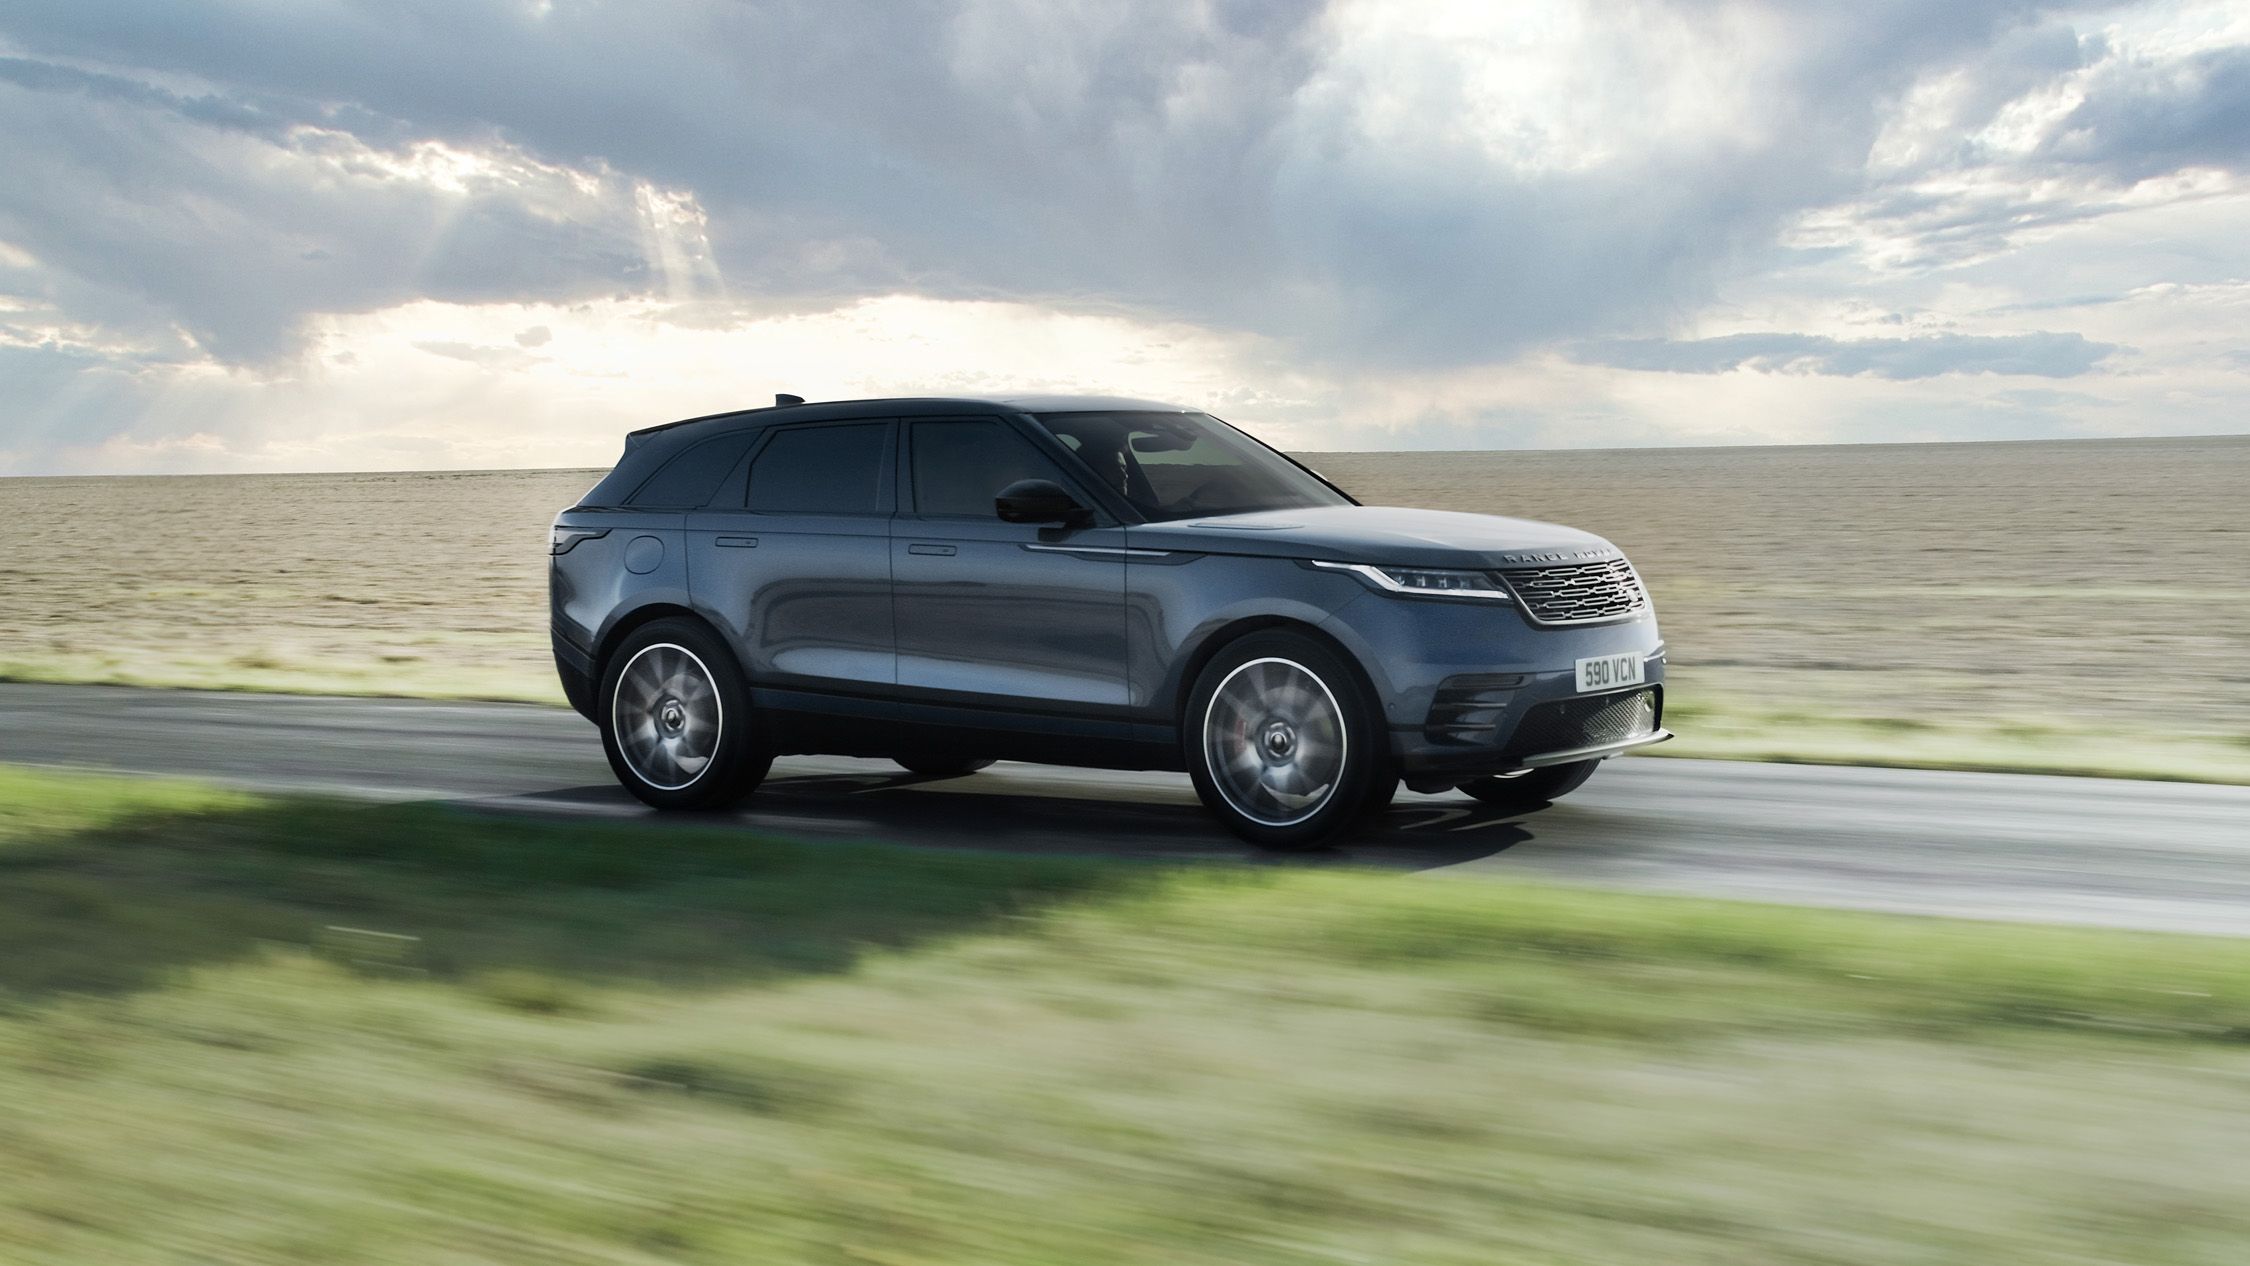 Review: Land Rover makes small updates to its littlest Range Rover